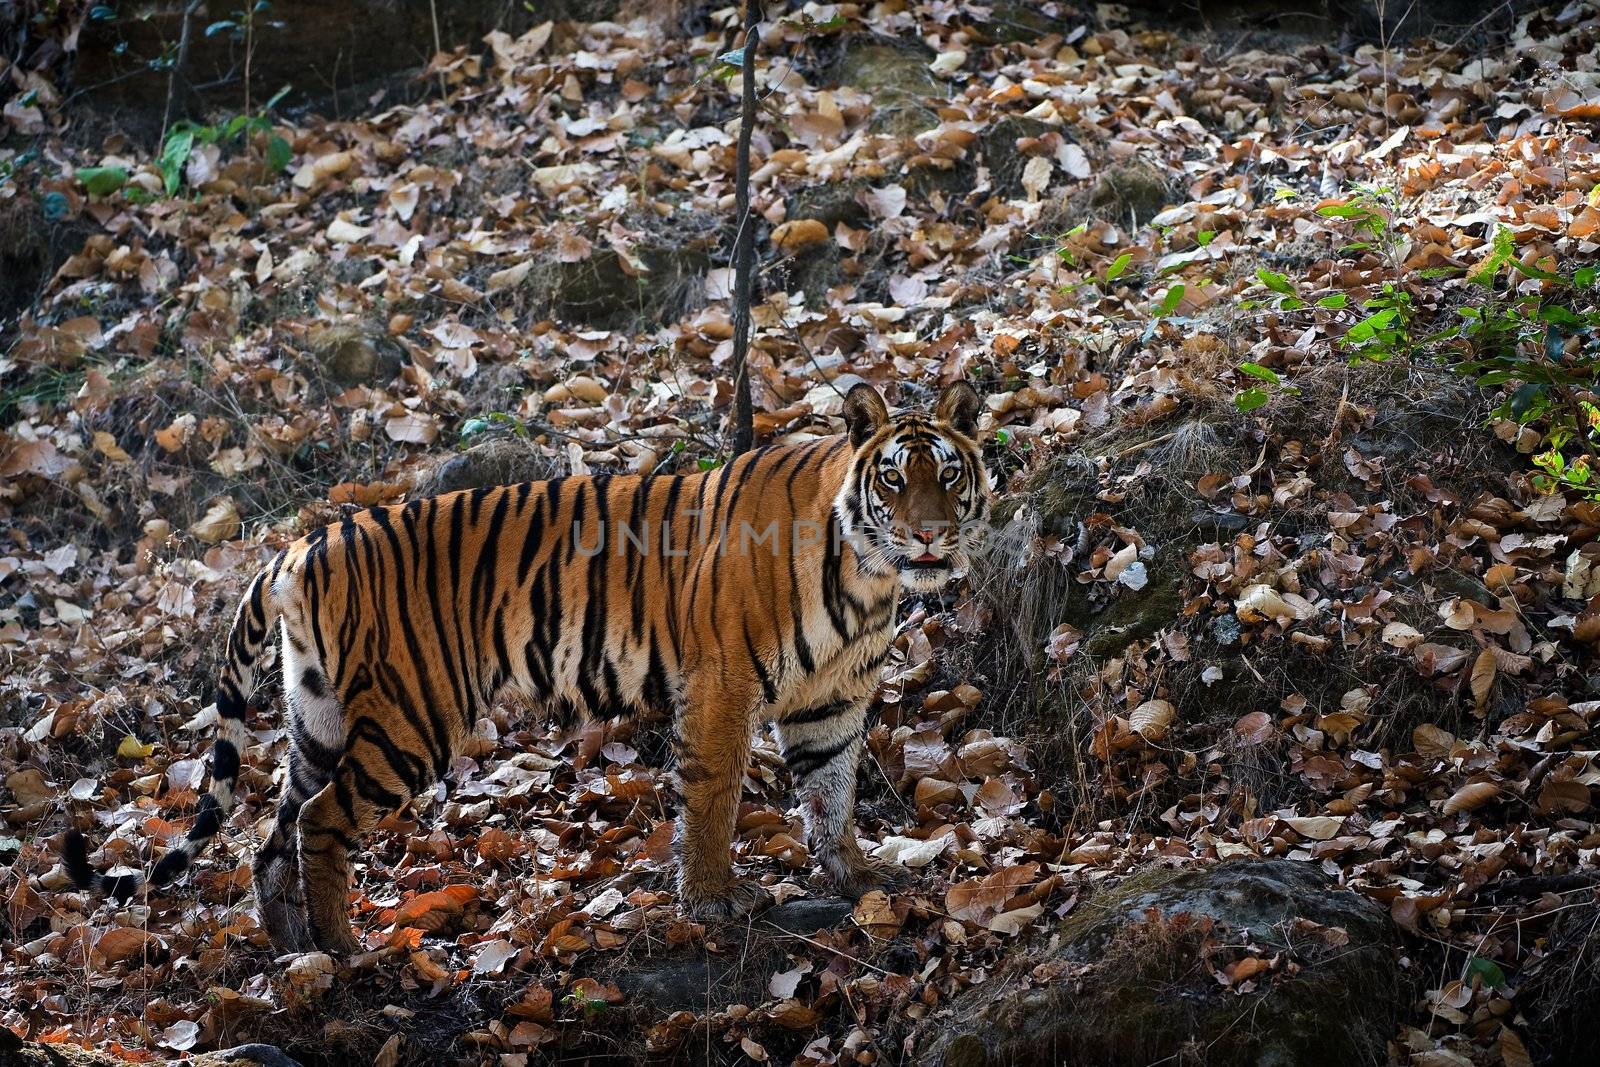 The tigress costs on stones and rapaciously looks in a lens.